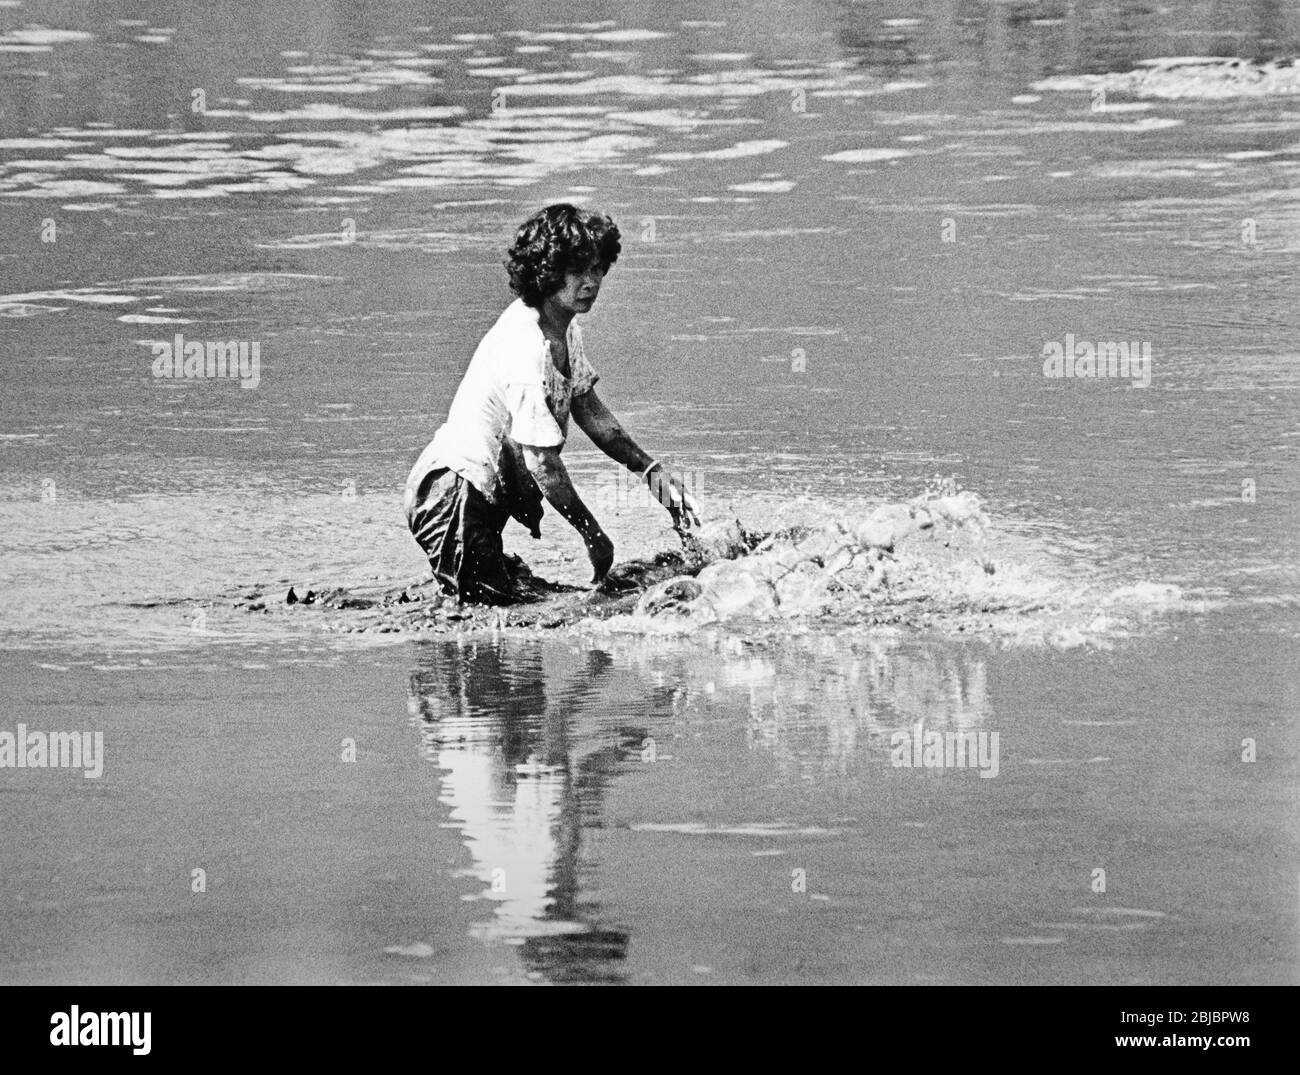 Hong Kong October 1986 Pond fishing farm, Kai Kuk Shue Ha in the New Territories. The picture is is part of a collection of photographs taken in Hong Kong between September and November, 1986. They represent a snapshot of Daily Life in the Crown Colony eleven years before sovereignty was transferred back to mainland China. Photograph by Howard Walker / Alamy. Stock Photo